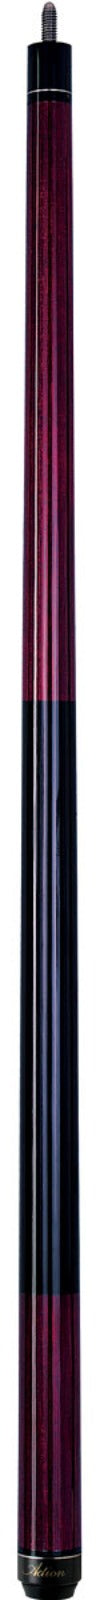 Action STR05 - Burgundy Pool Cue -Action